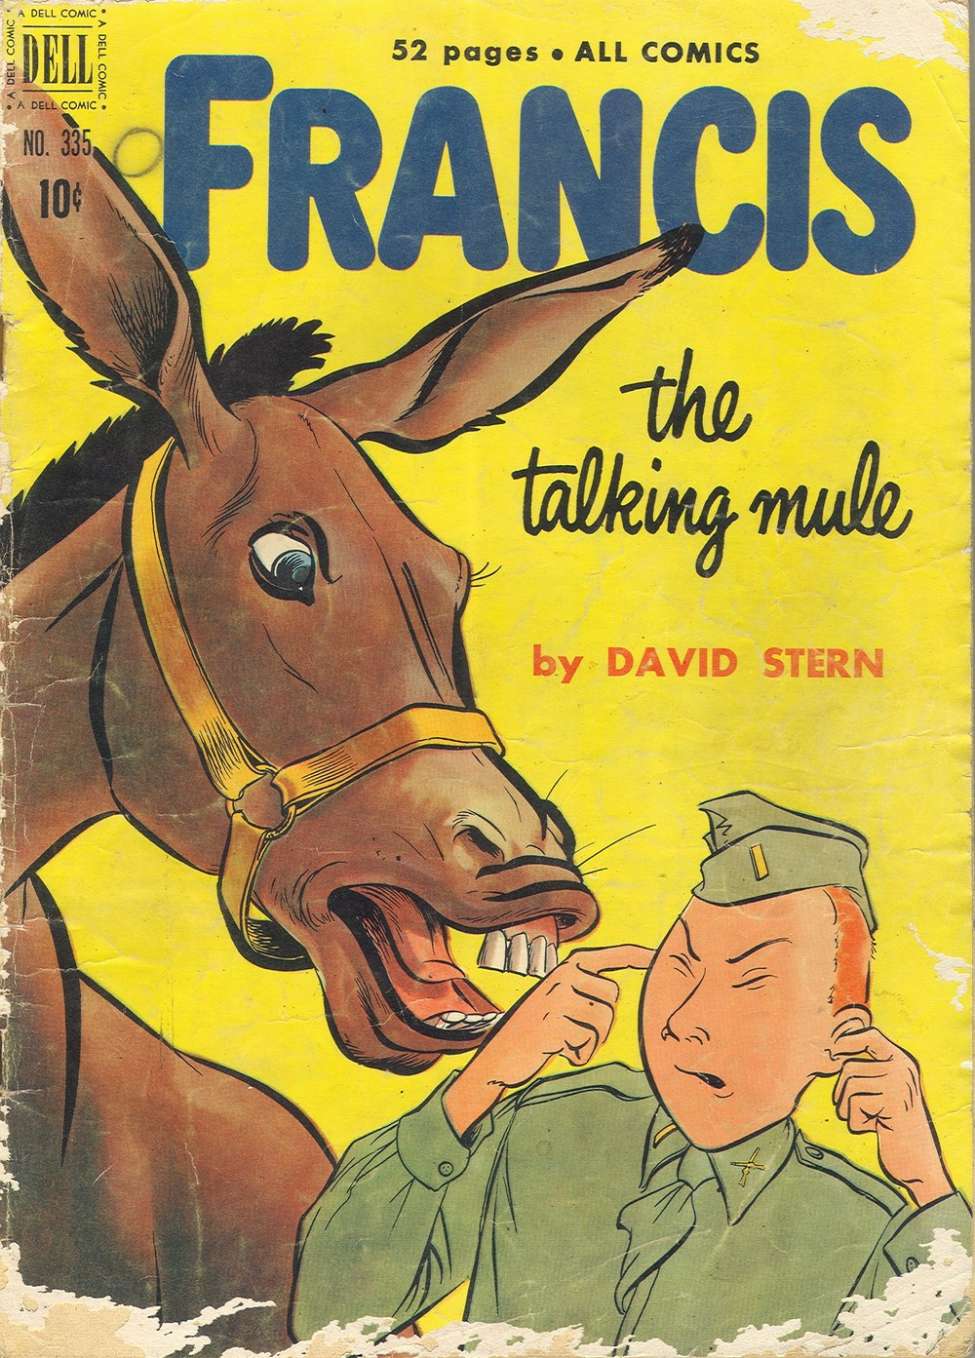 Comic Book Cover For 0335 - Francis, The Famous Talking Mule